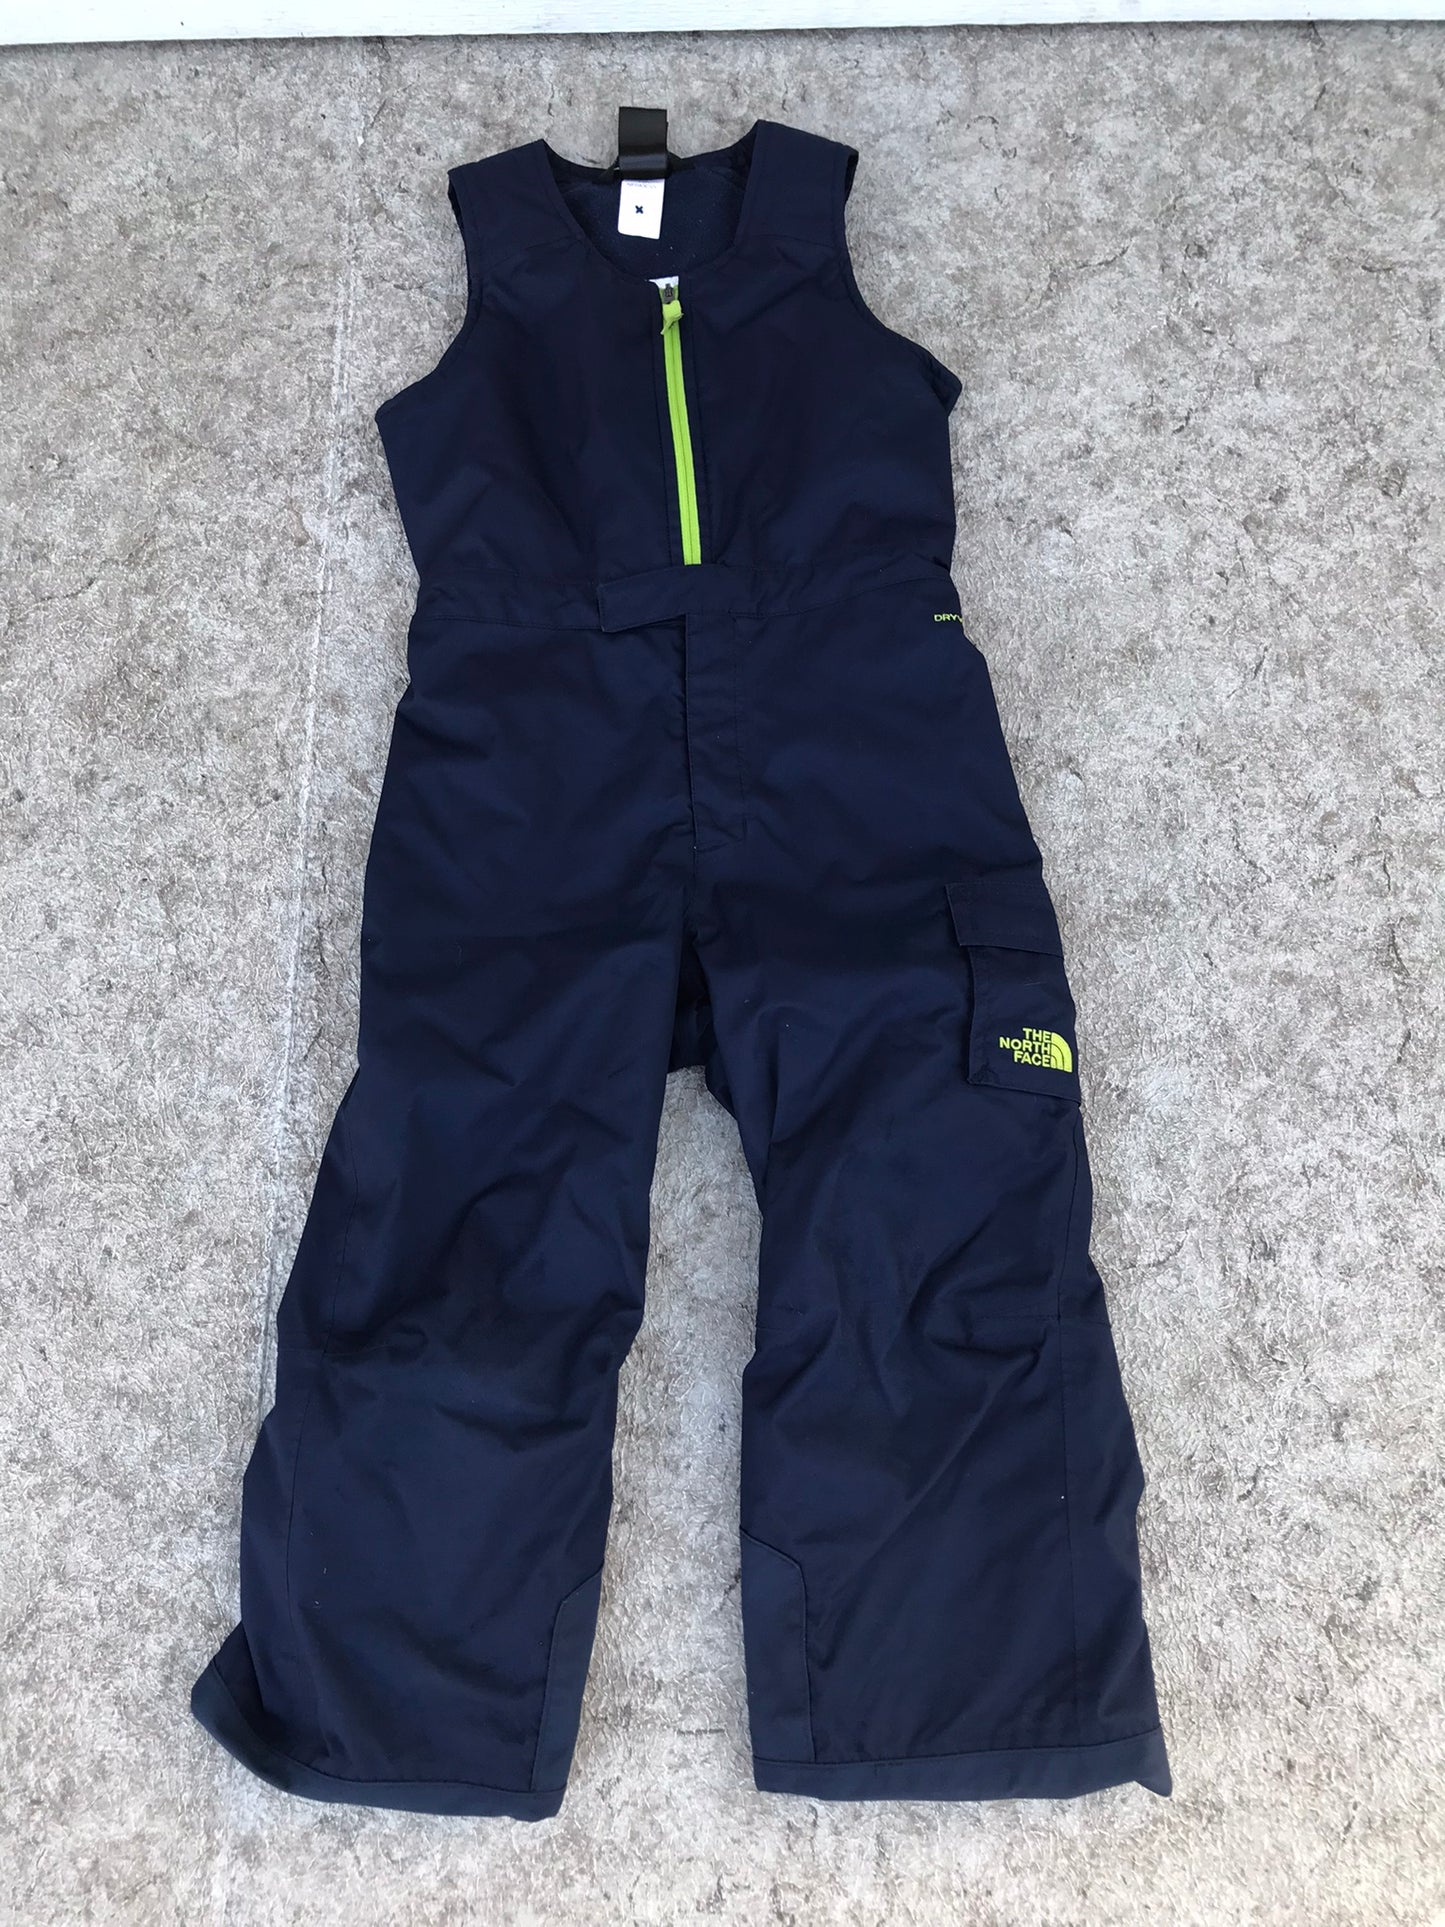 Snow Pants Child Size 5-6 The North Face Dry Vent With Bib Toddler Adjustable Marine Blue and Lime Minor Wear